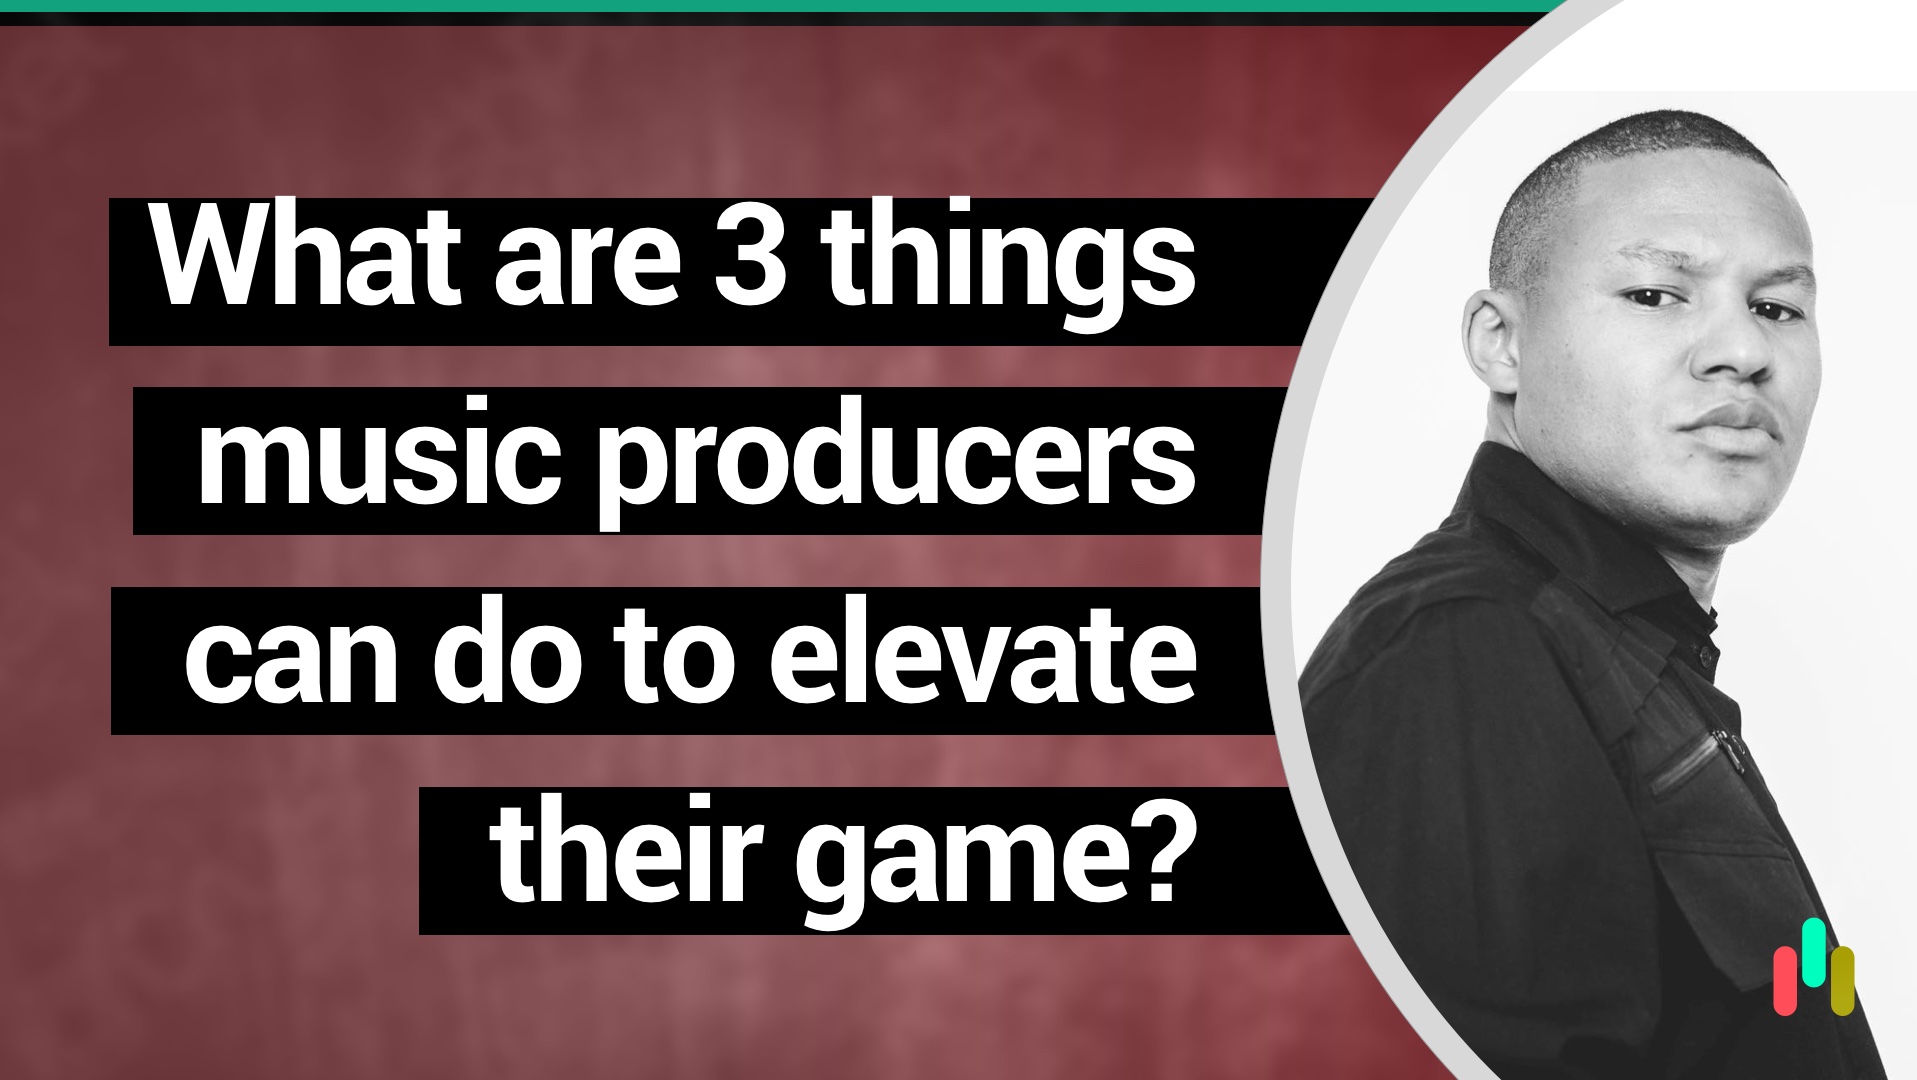 What are 3 things music producers can do to elevate their game?